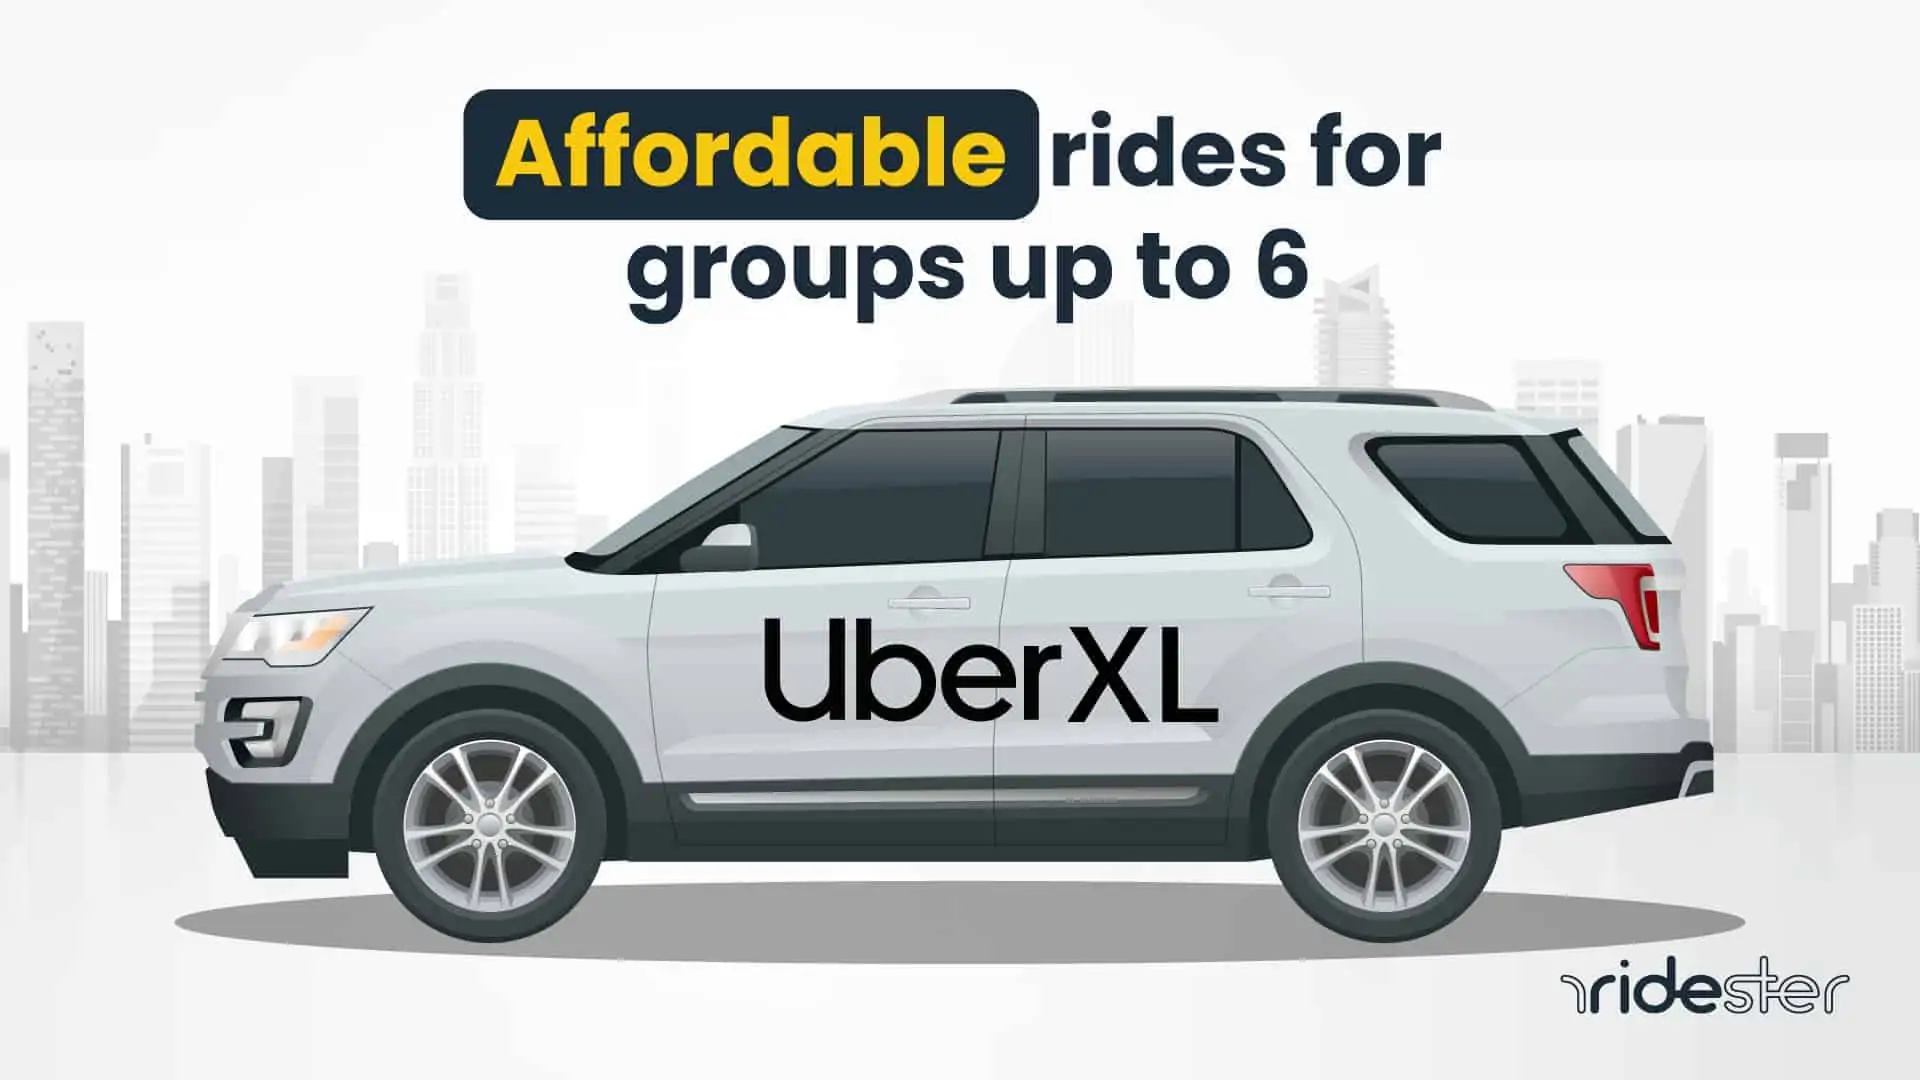 a vector graphic showing an Uber XL vehicle with the text "affordable rides for groups up to 6" above it